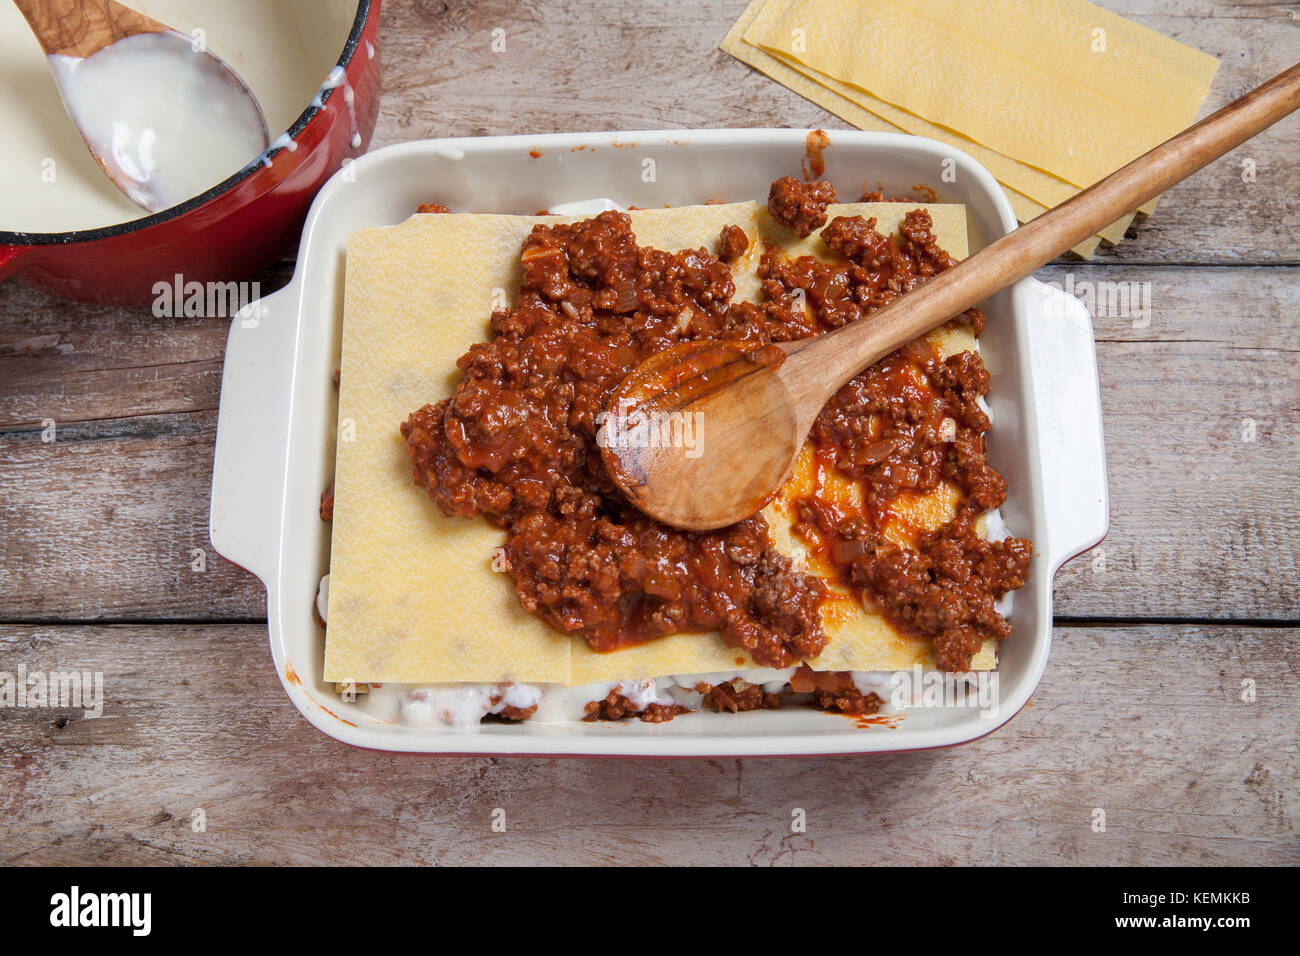 Making Lasagna Bolognese with beef, tomato at kitchen Stock Photo